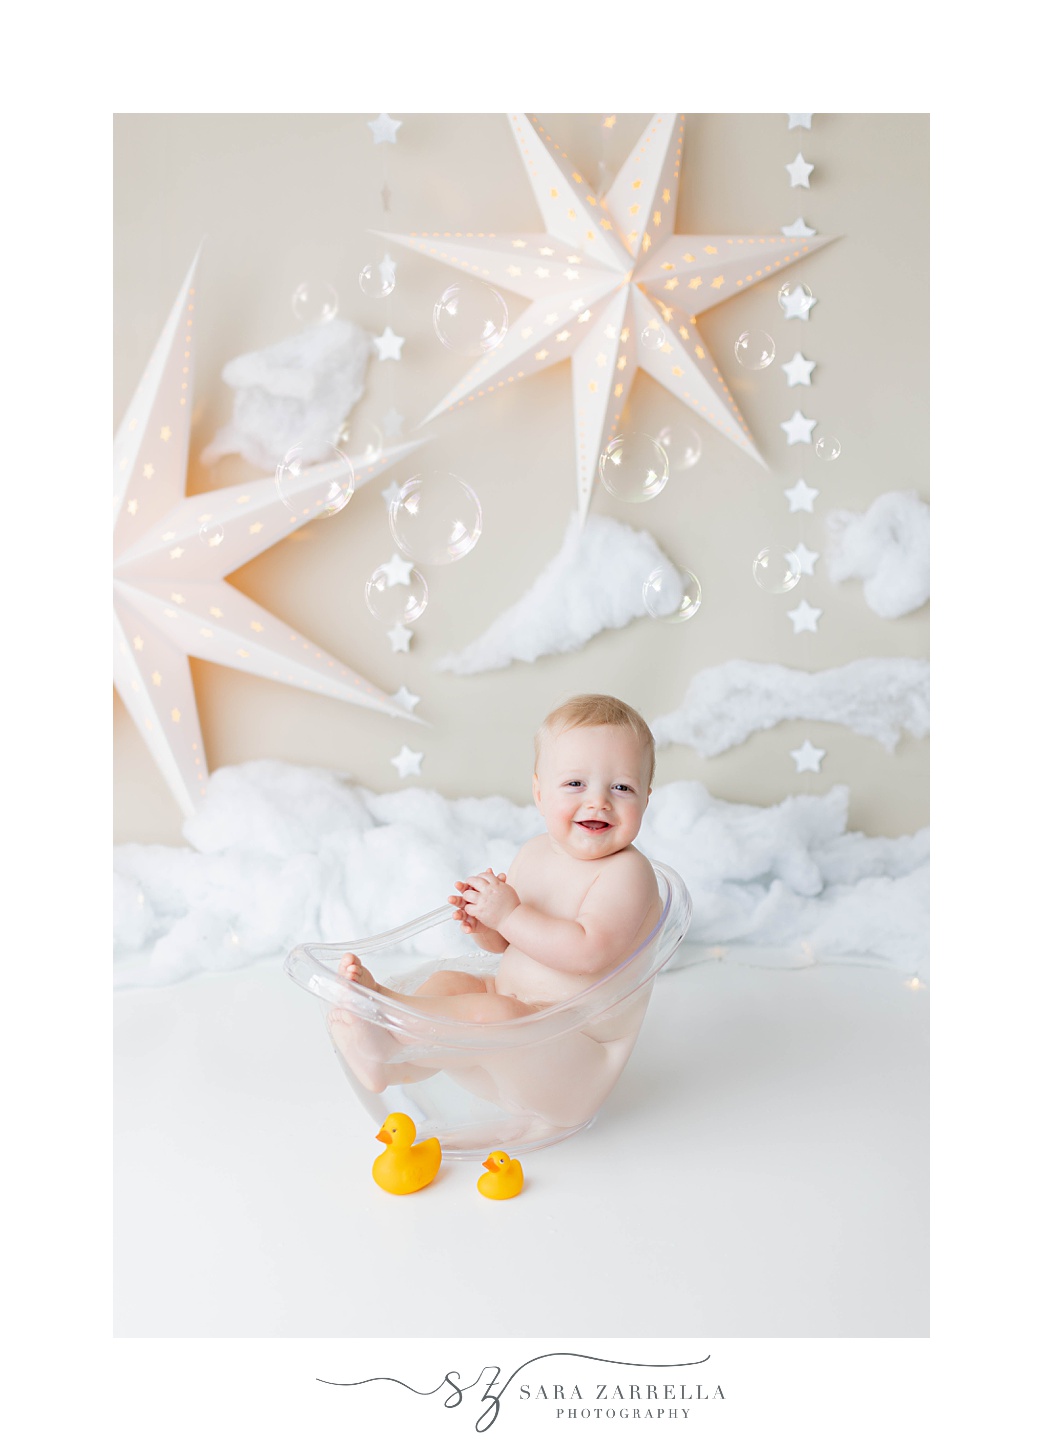 baby plays in tub during cake smash with RI family photographer Sara Zarrella Photography 